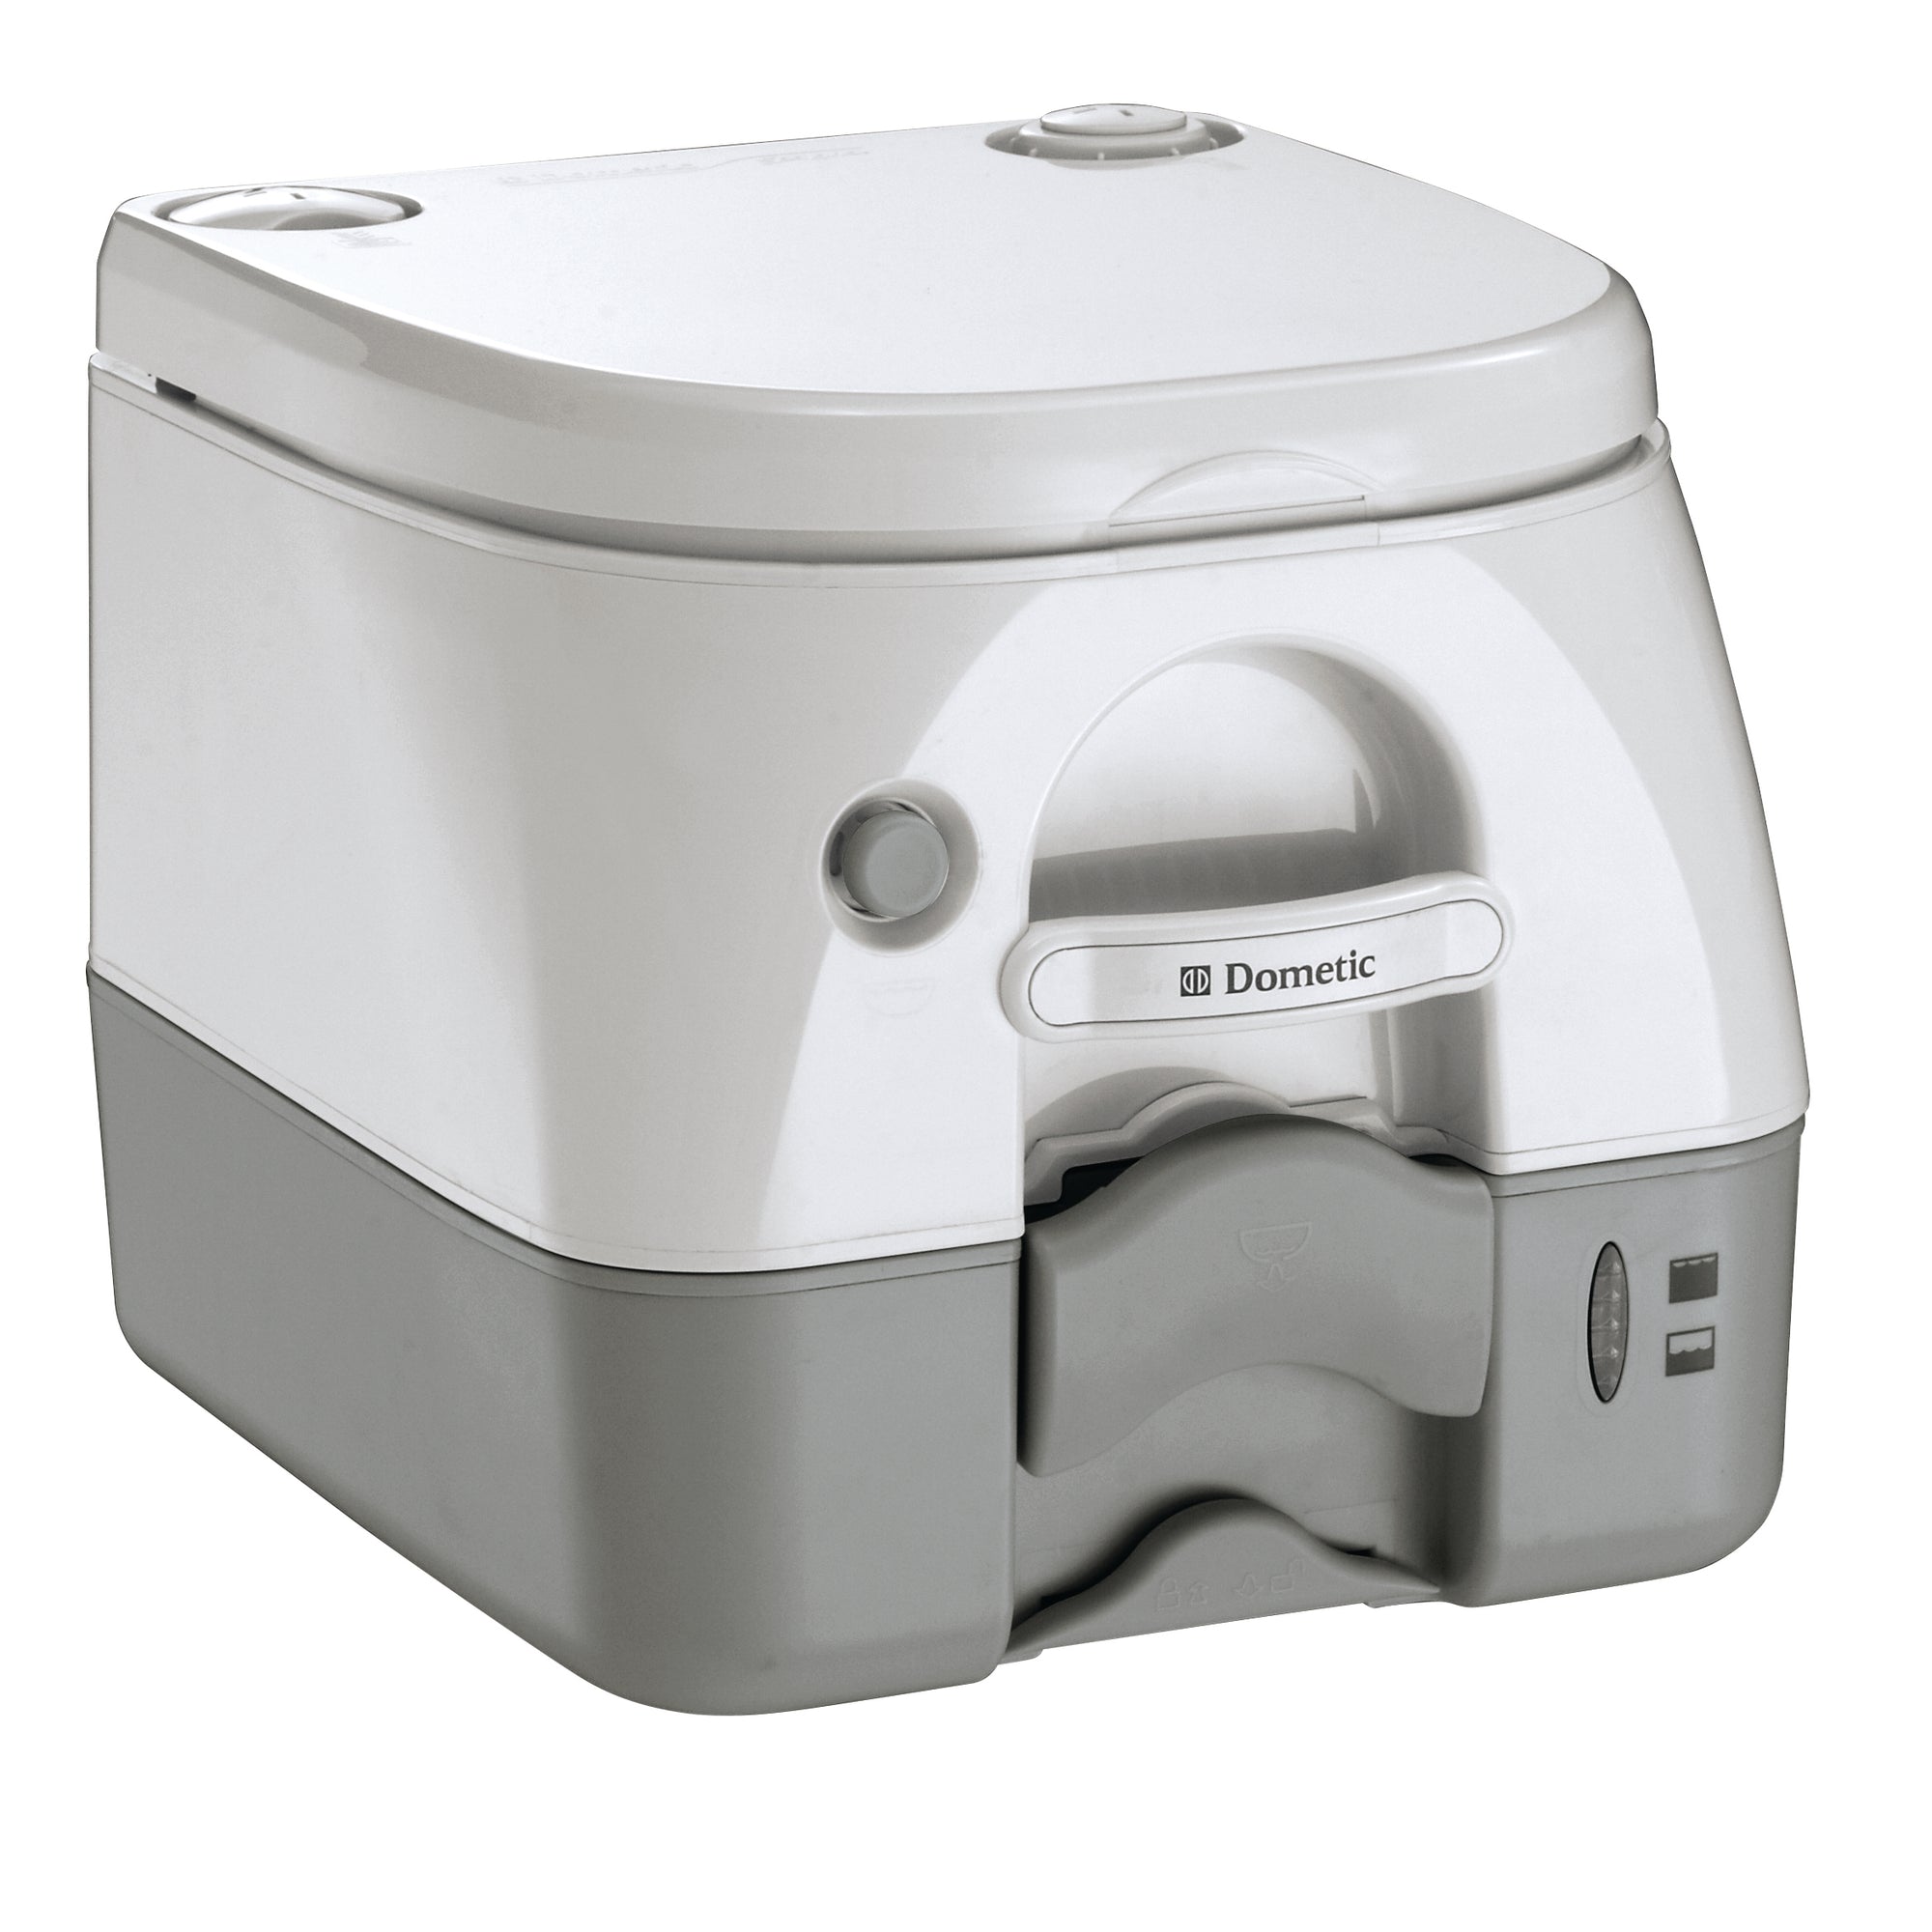 Dometic 301097406 970 Series Portable Toilet - Gray With SS Brackets, 2.6 Gallon